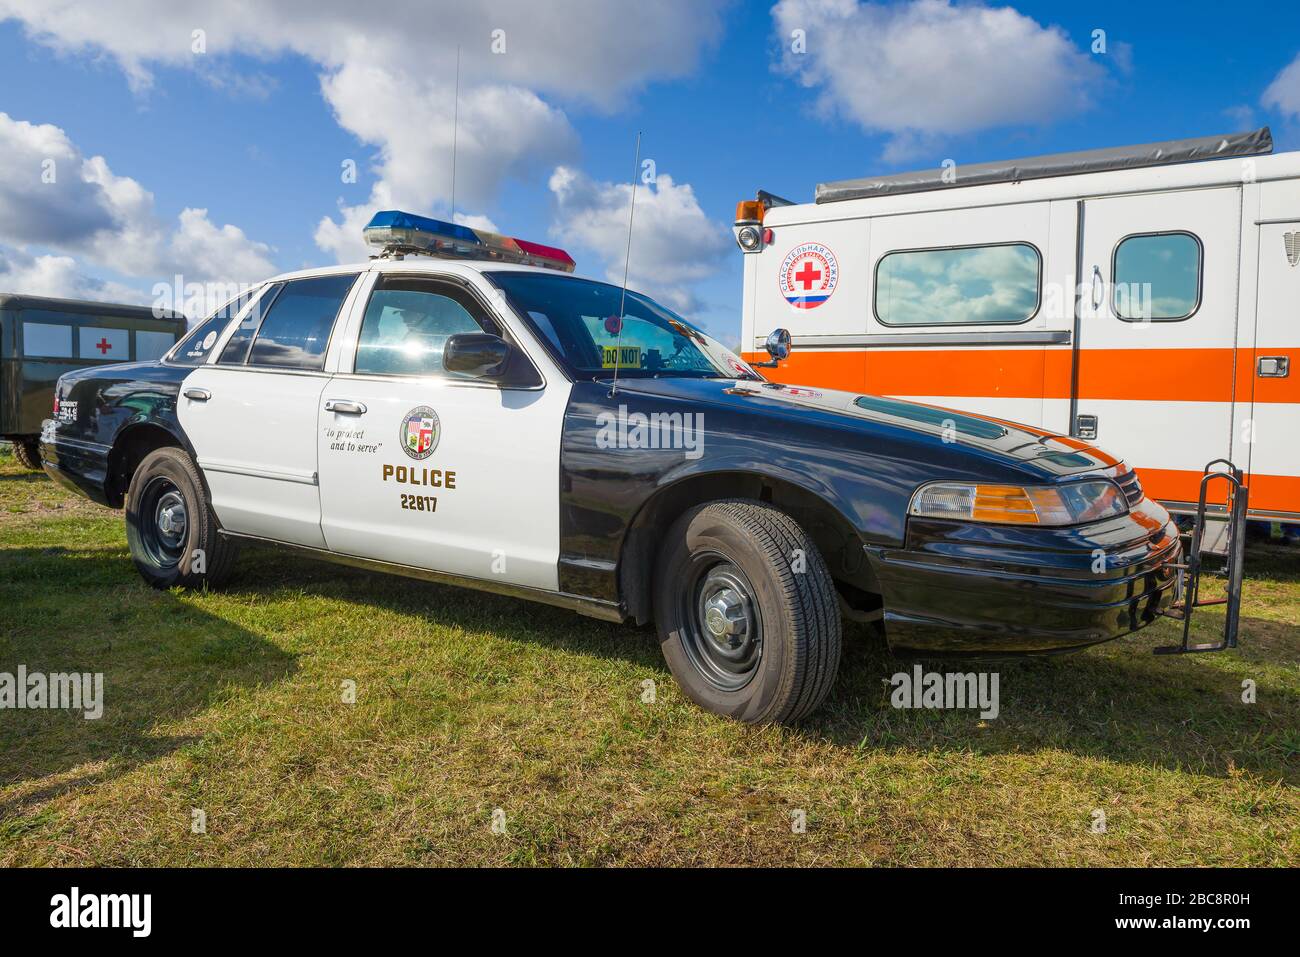 KRONSHTADT, RUSSIA - SEPTEMBER 14, 2019: Classic American police car Ford Crown Victoria Police Interceptor close-up. Member of the retro transport fe Stock Photo